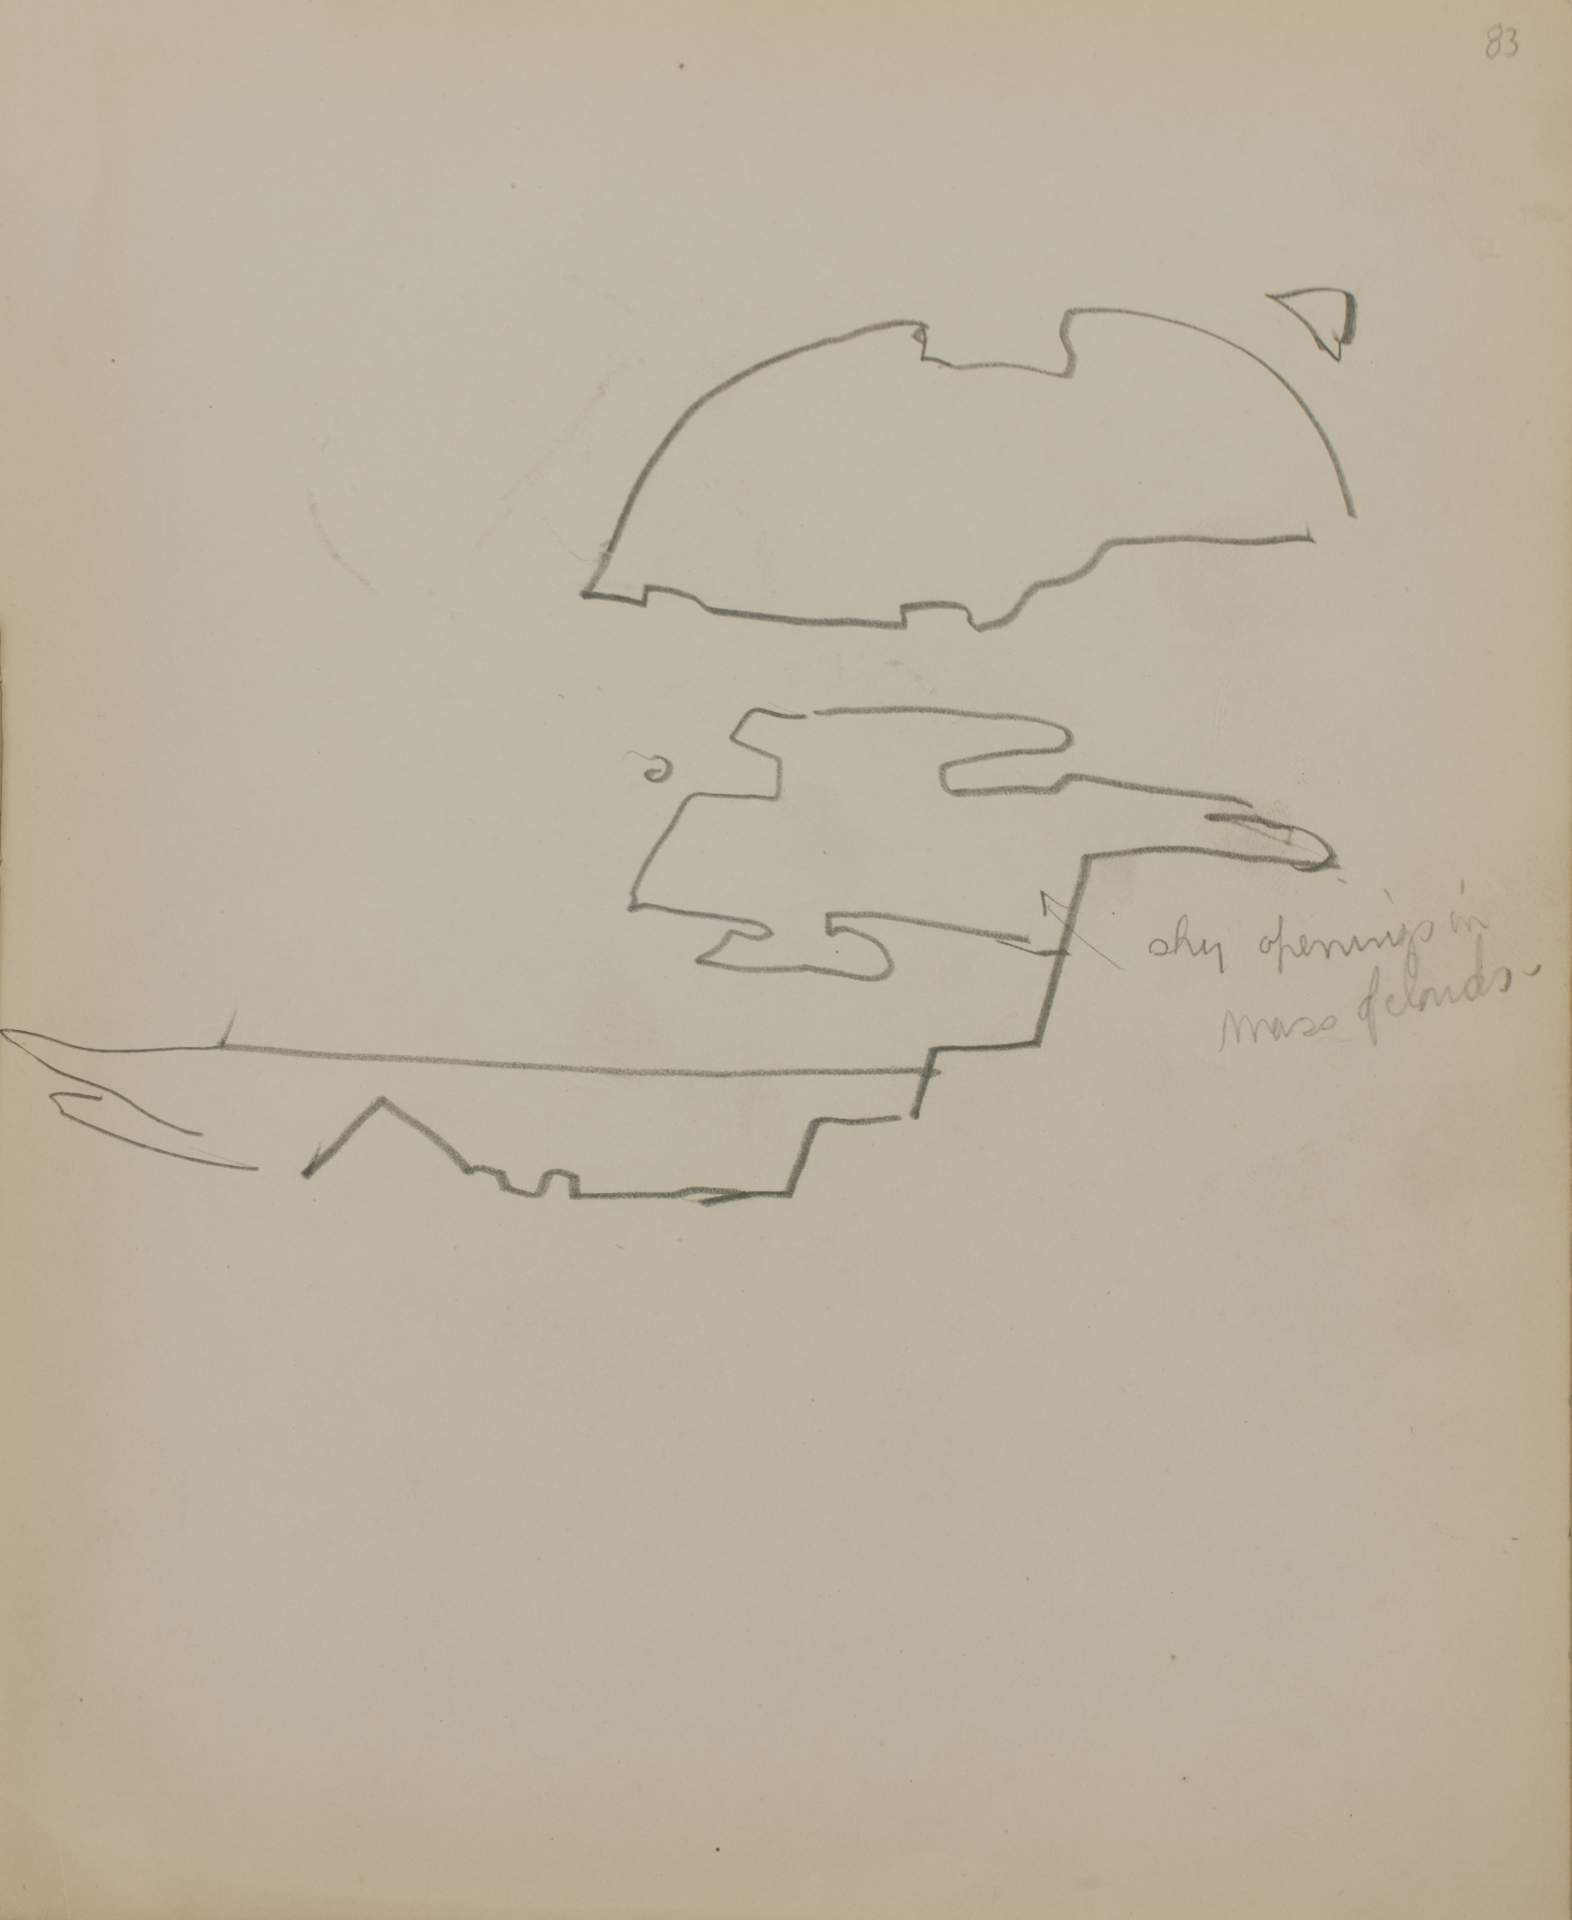 Untitled (sketch of mass of clouds)